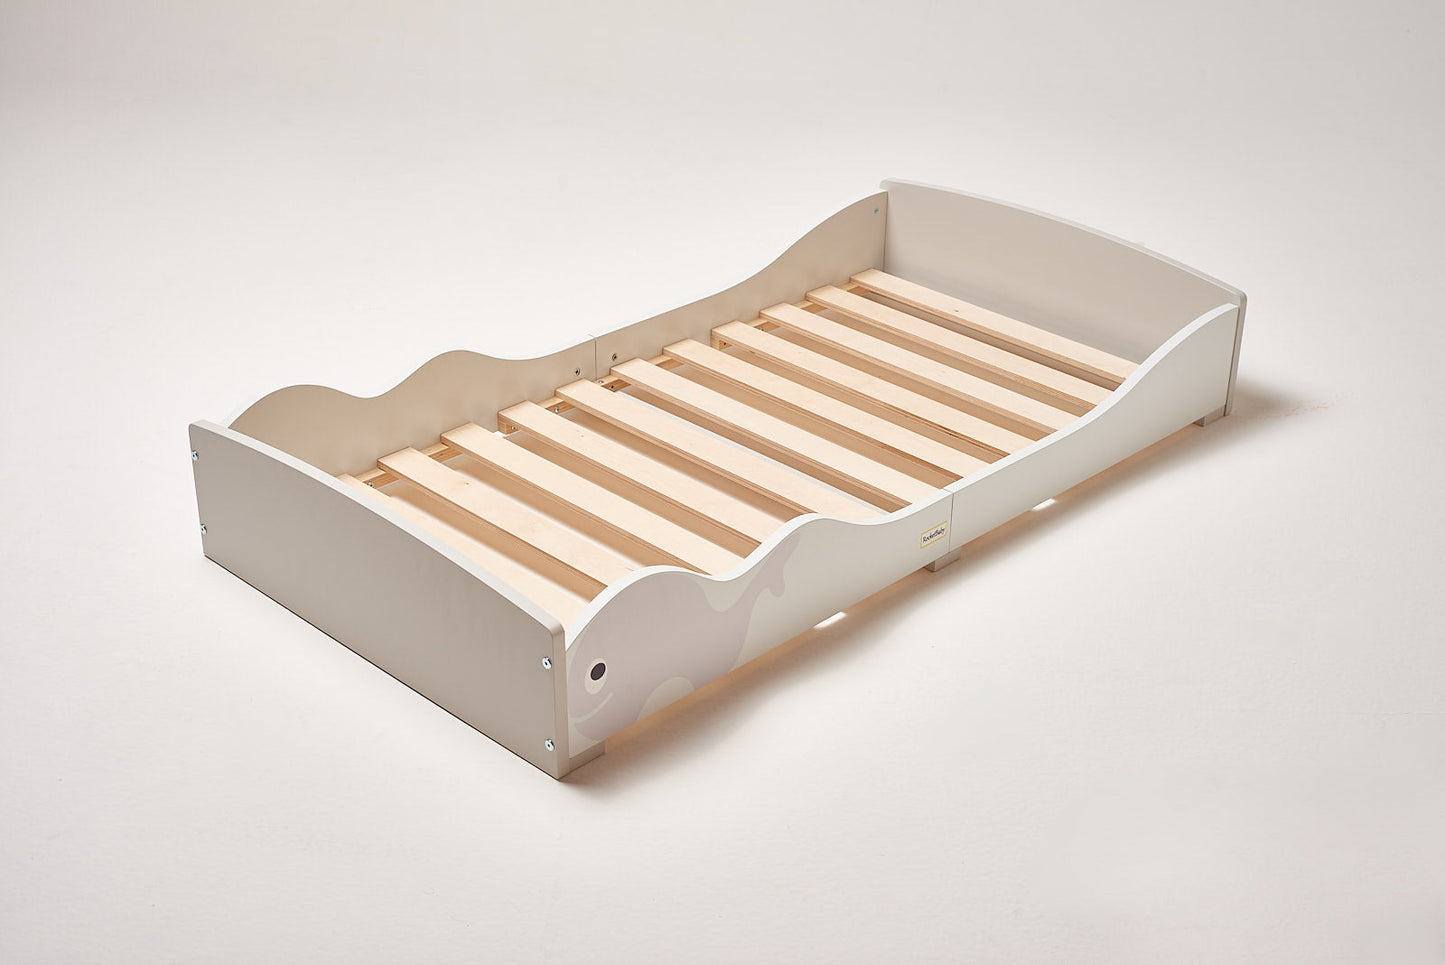 Low Kids Bed - Montessori Grey Whale - Play. Learn. Thrive. ™